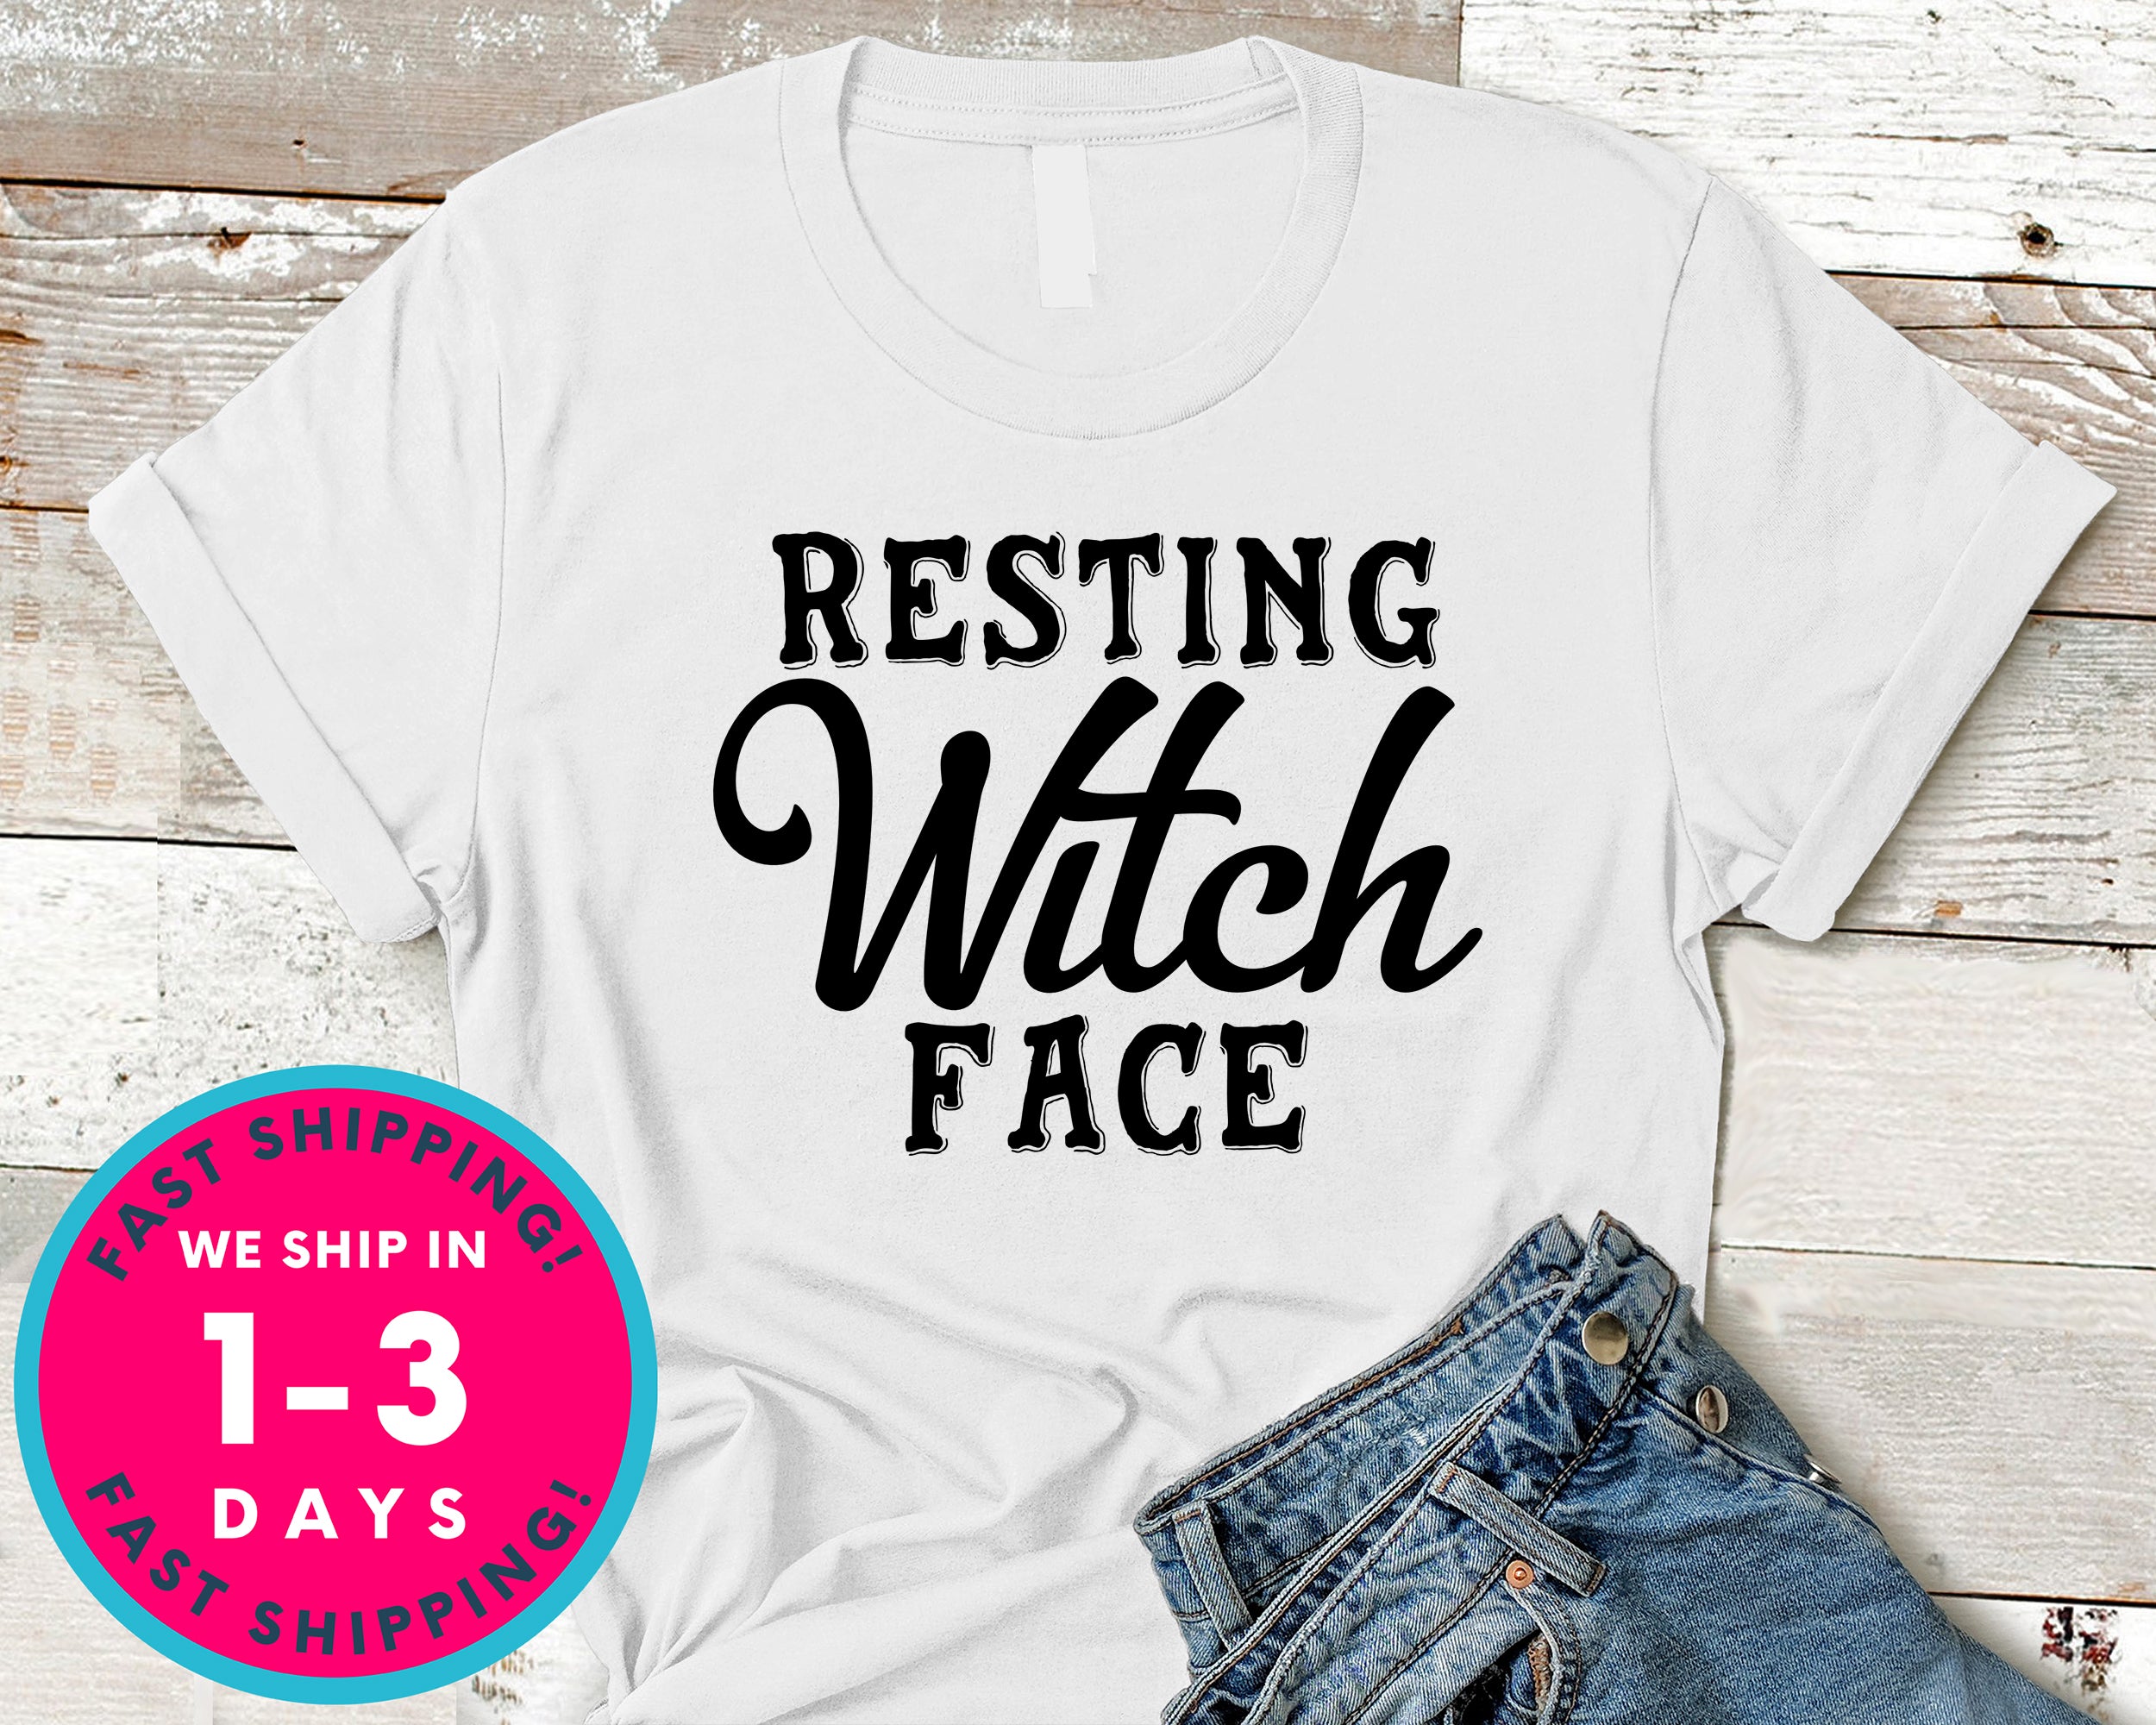 Resting Witch Face T-Shirt - Halloween Horror Scary Shirt